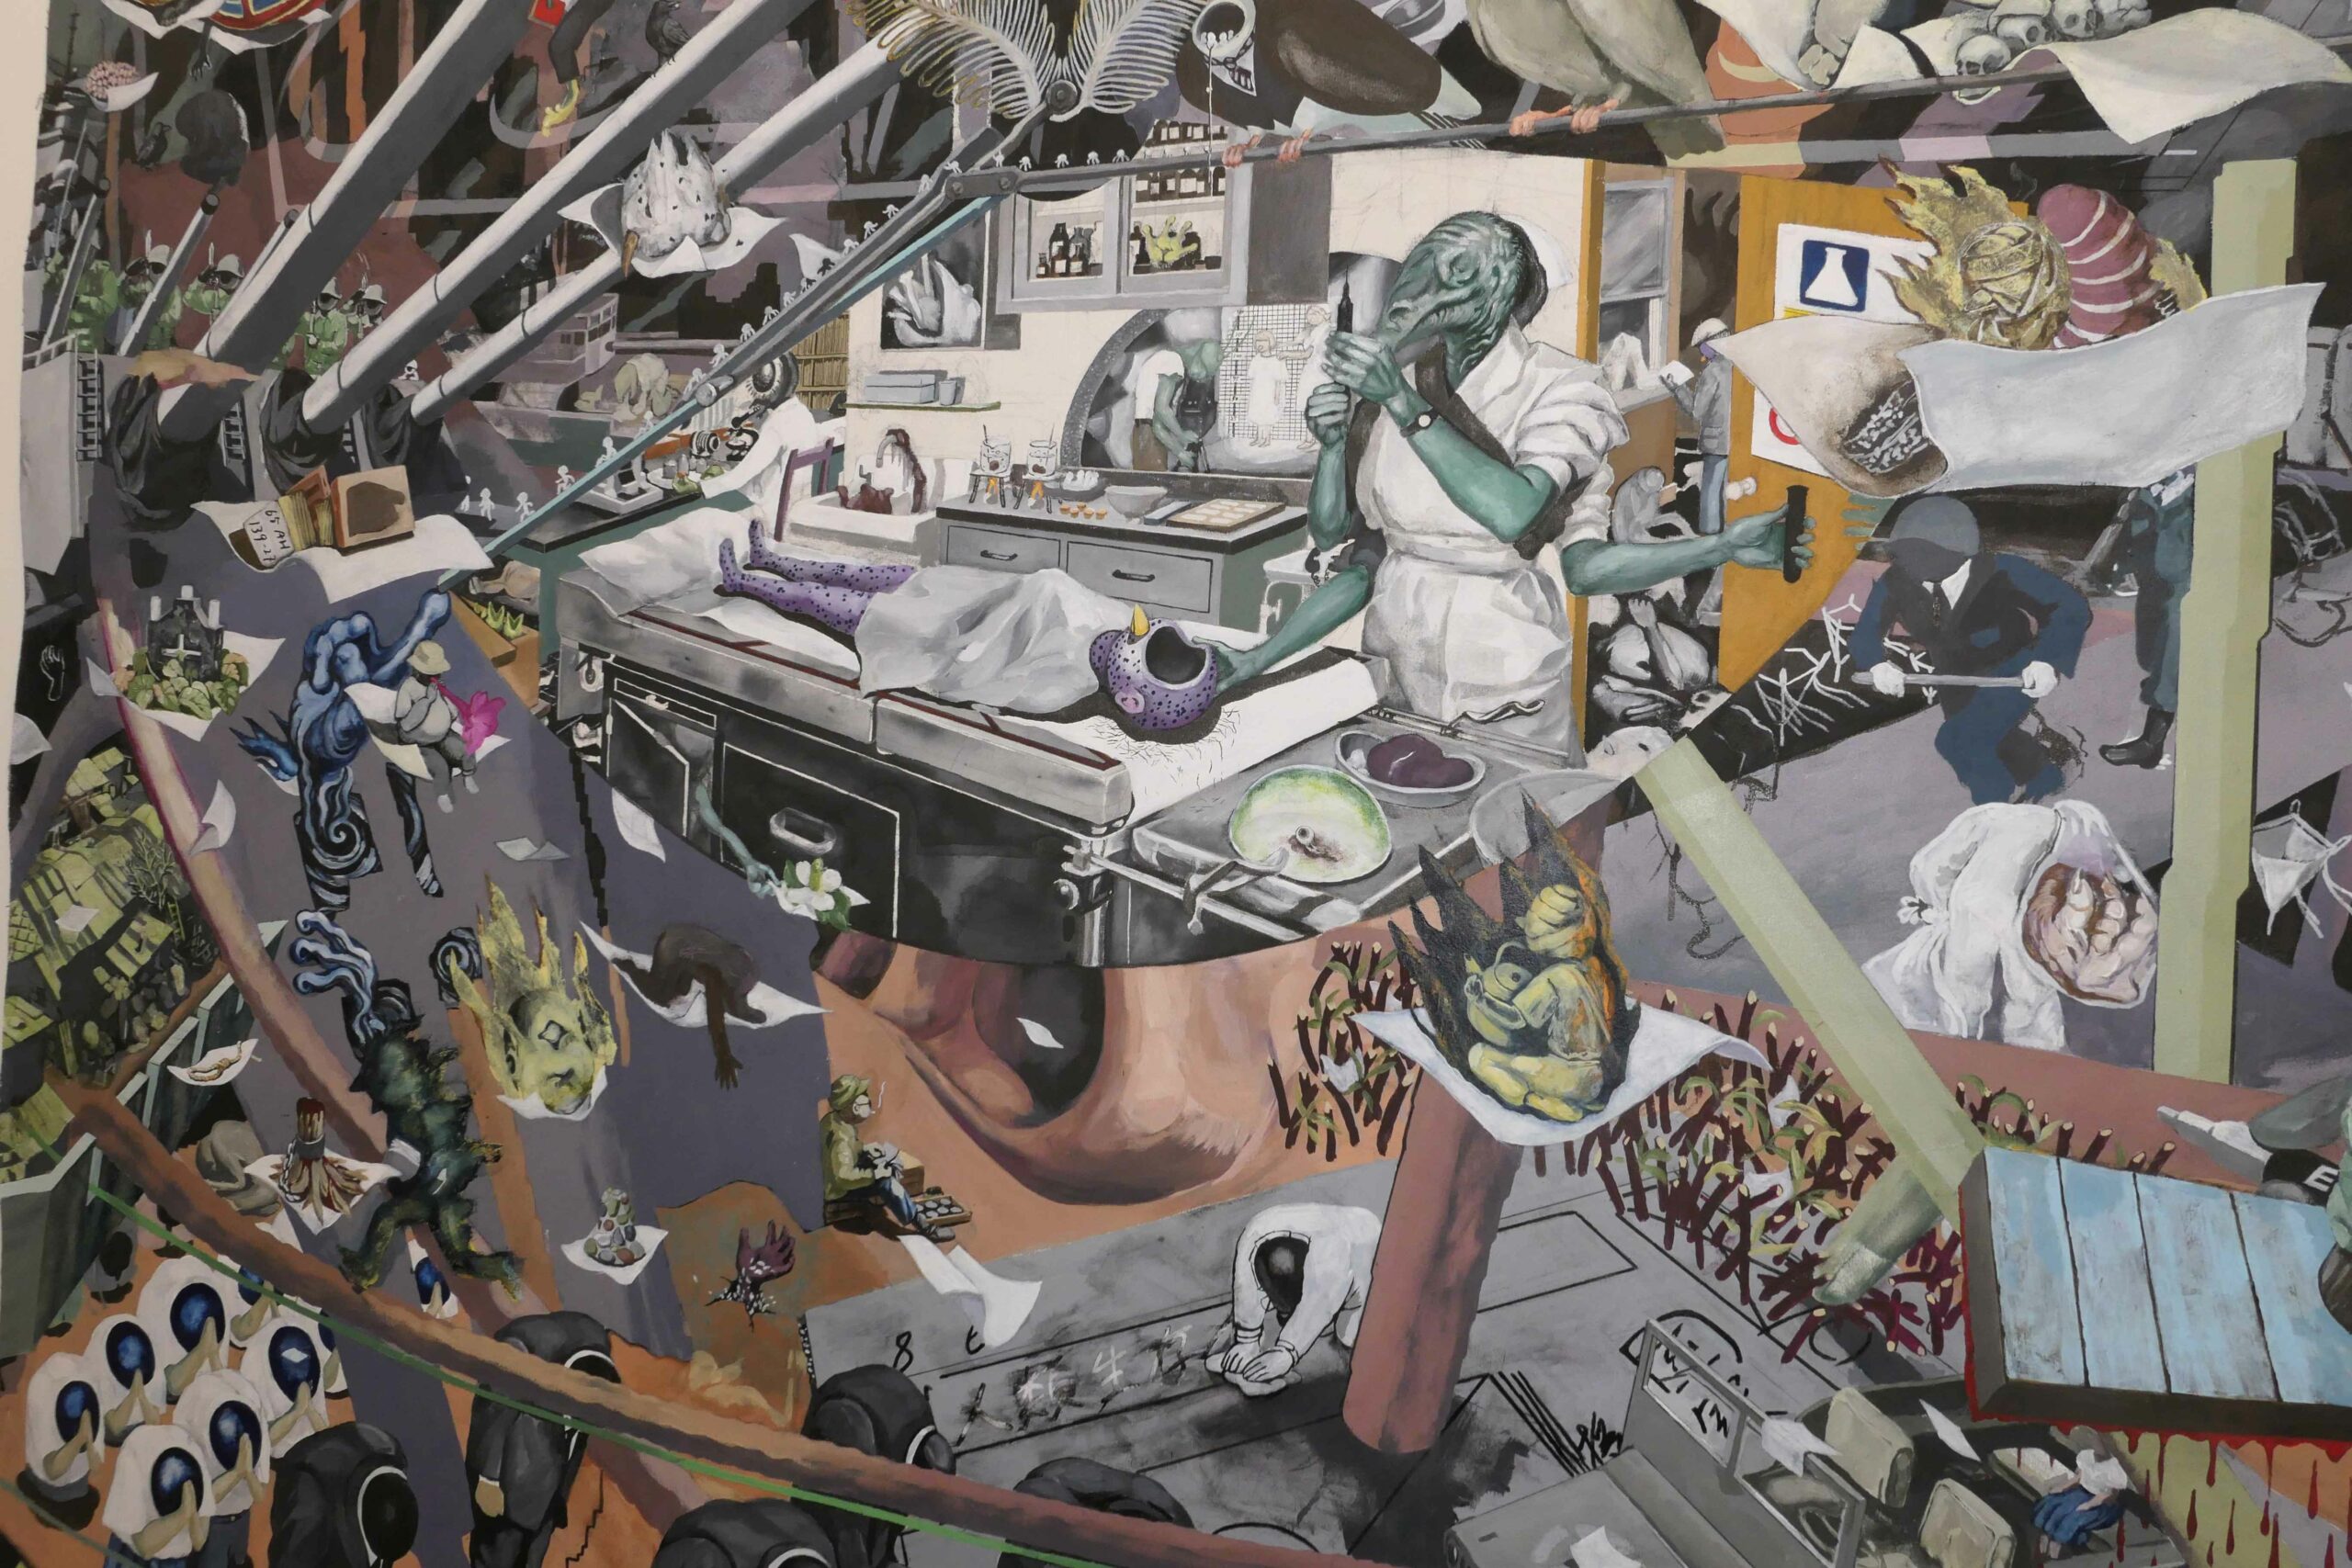 A surrealist painting consisting of overlapping images of aliens, surgeries, running police officers, battleship cannons, people praying and other imagery.